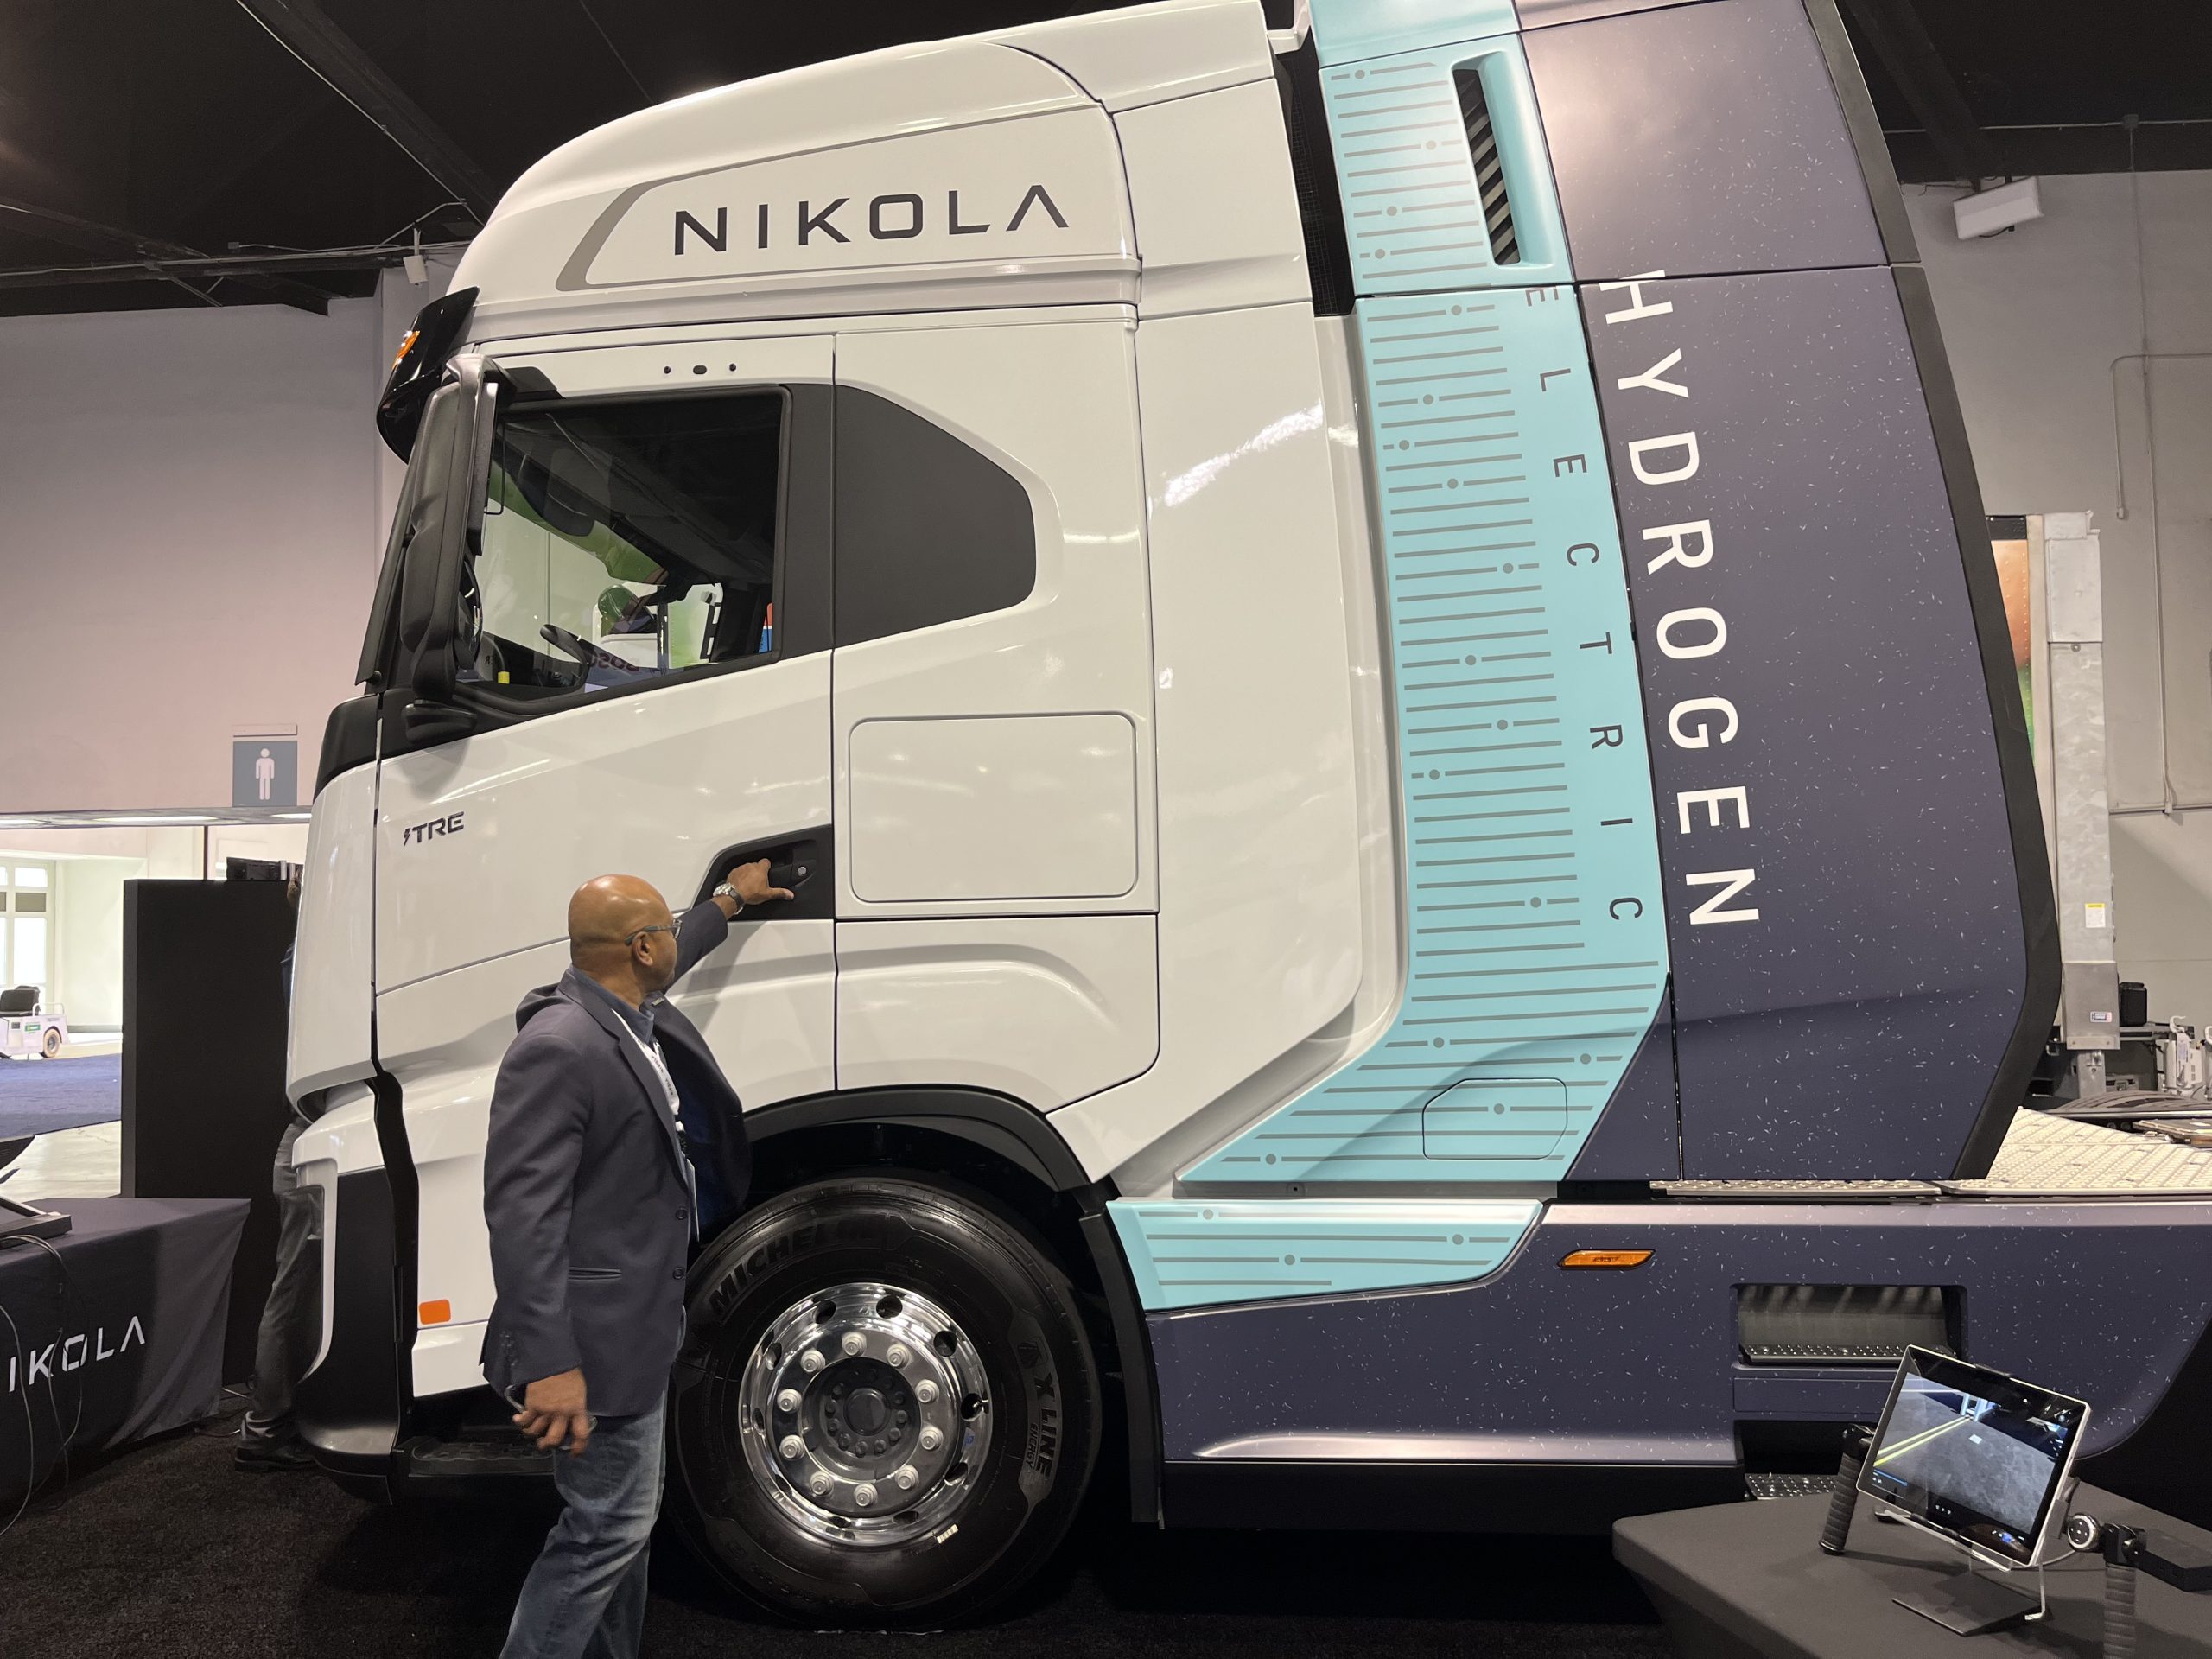 https://e-vehicleinfo.com/global/bosch-and-nikola-are-developing-a-commercial-hydrogen-fuel-cell-truck/